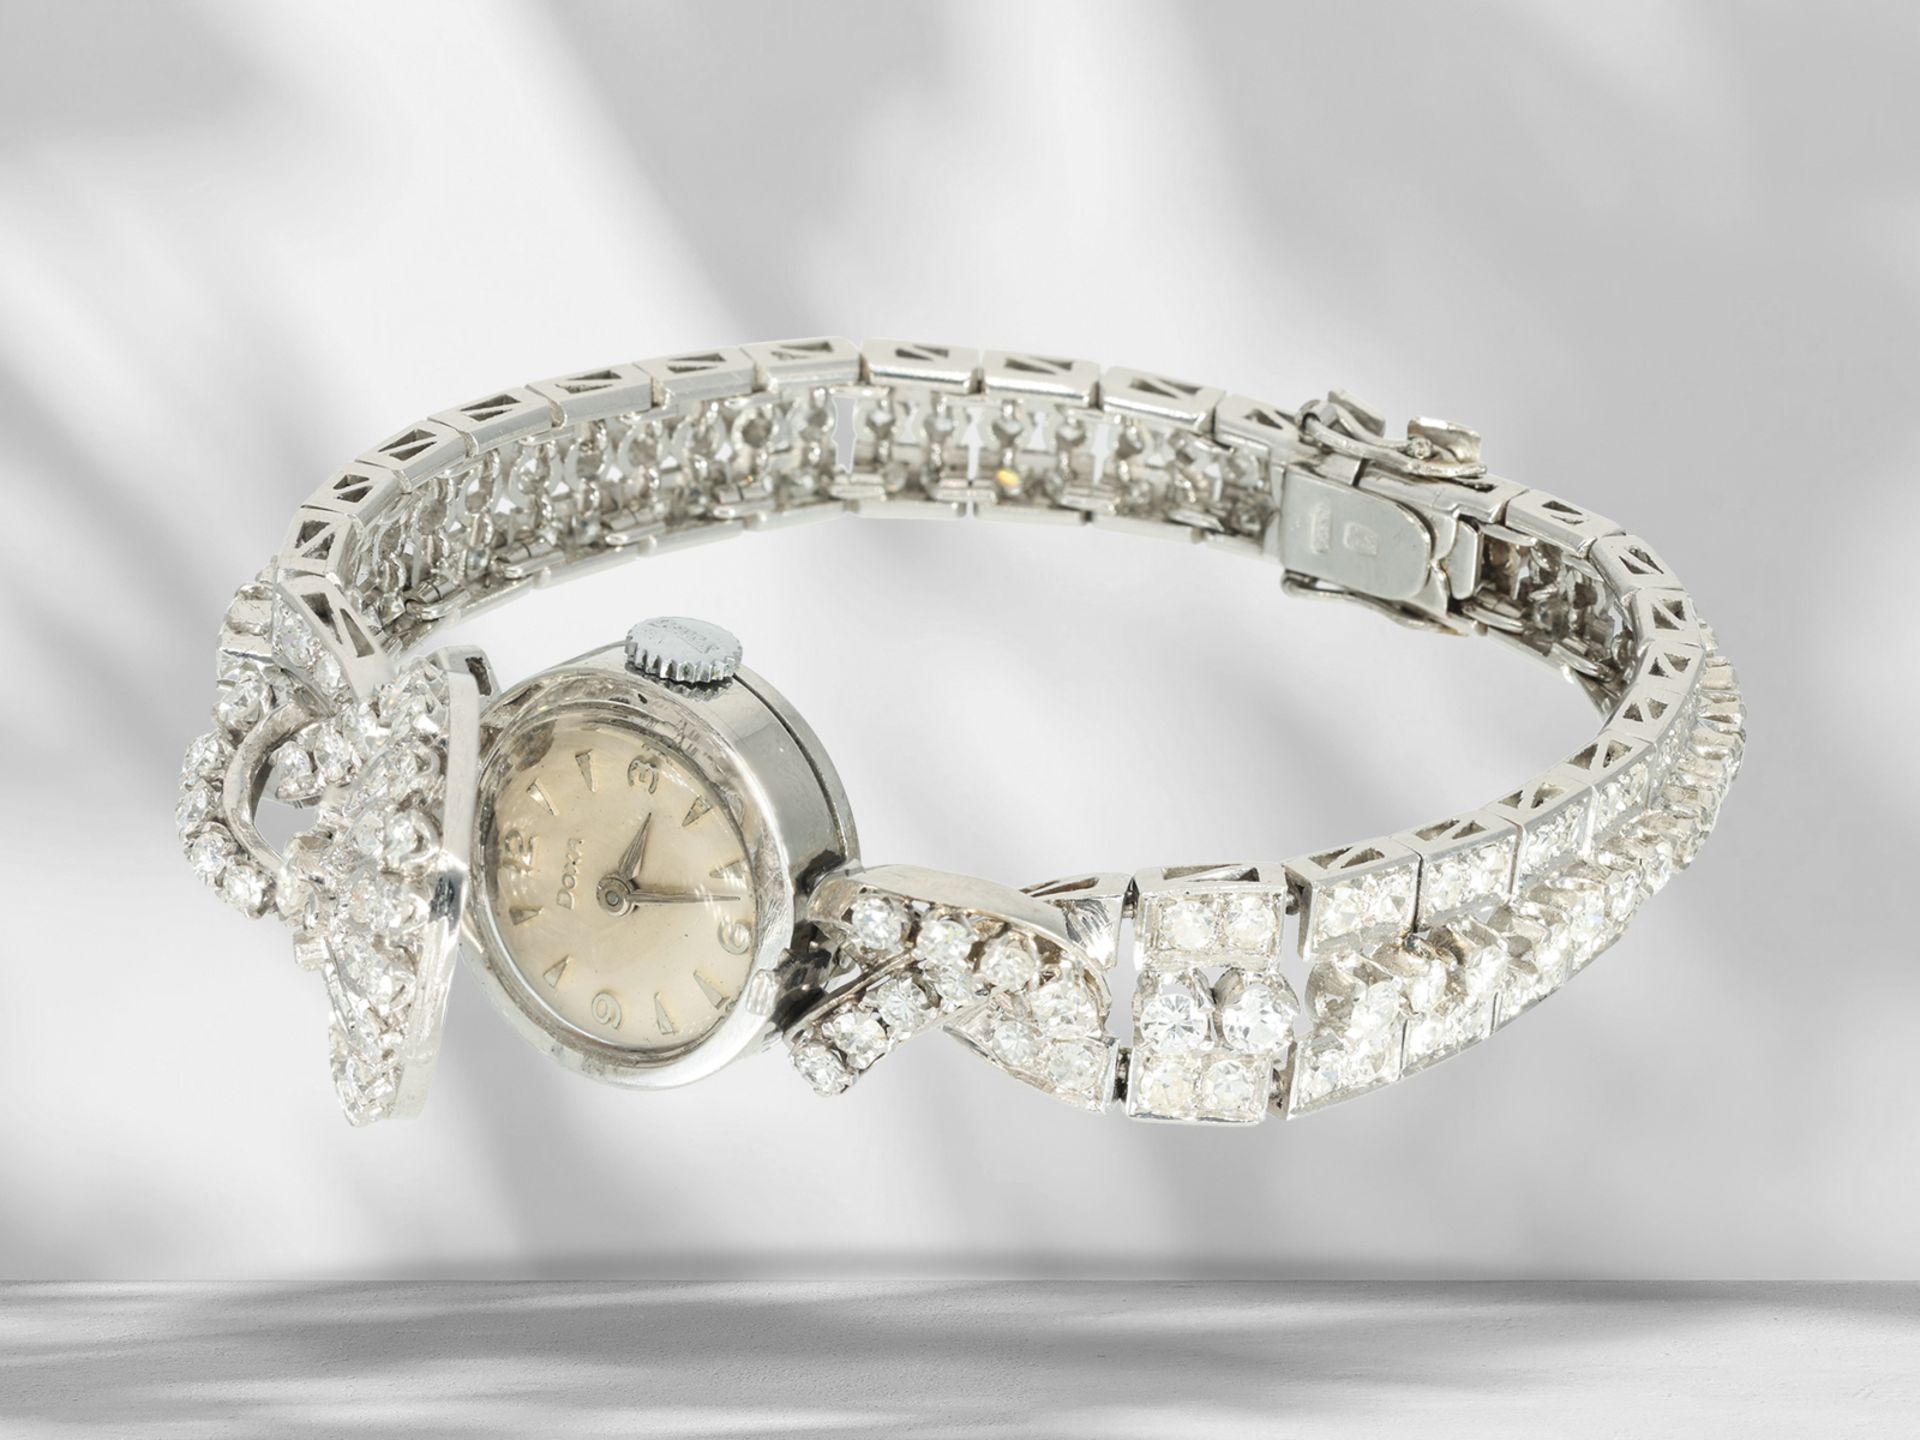 Very decorative vintage jewellery watch/cocktail watch made of platinum, completely set with diamond - Image 2 of 6